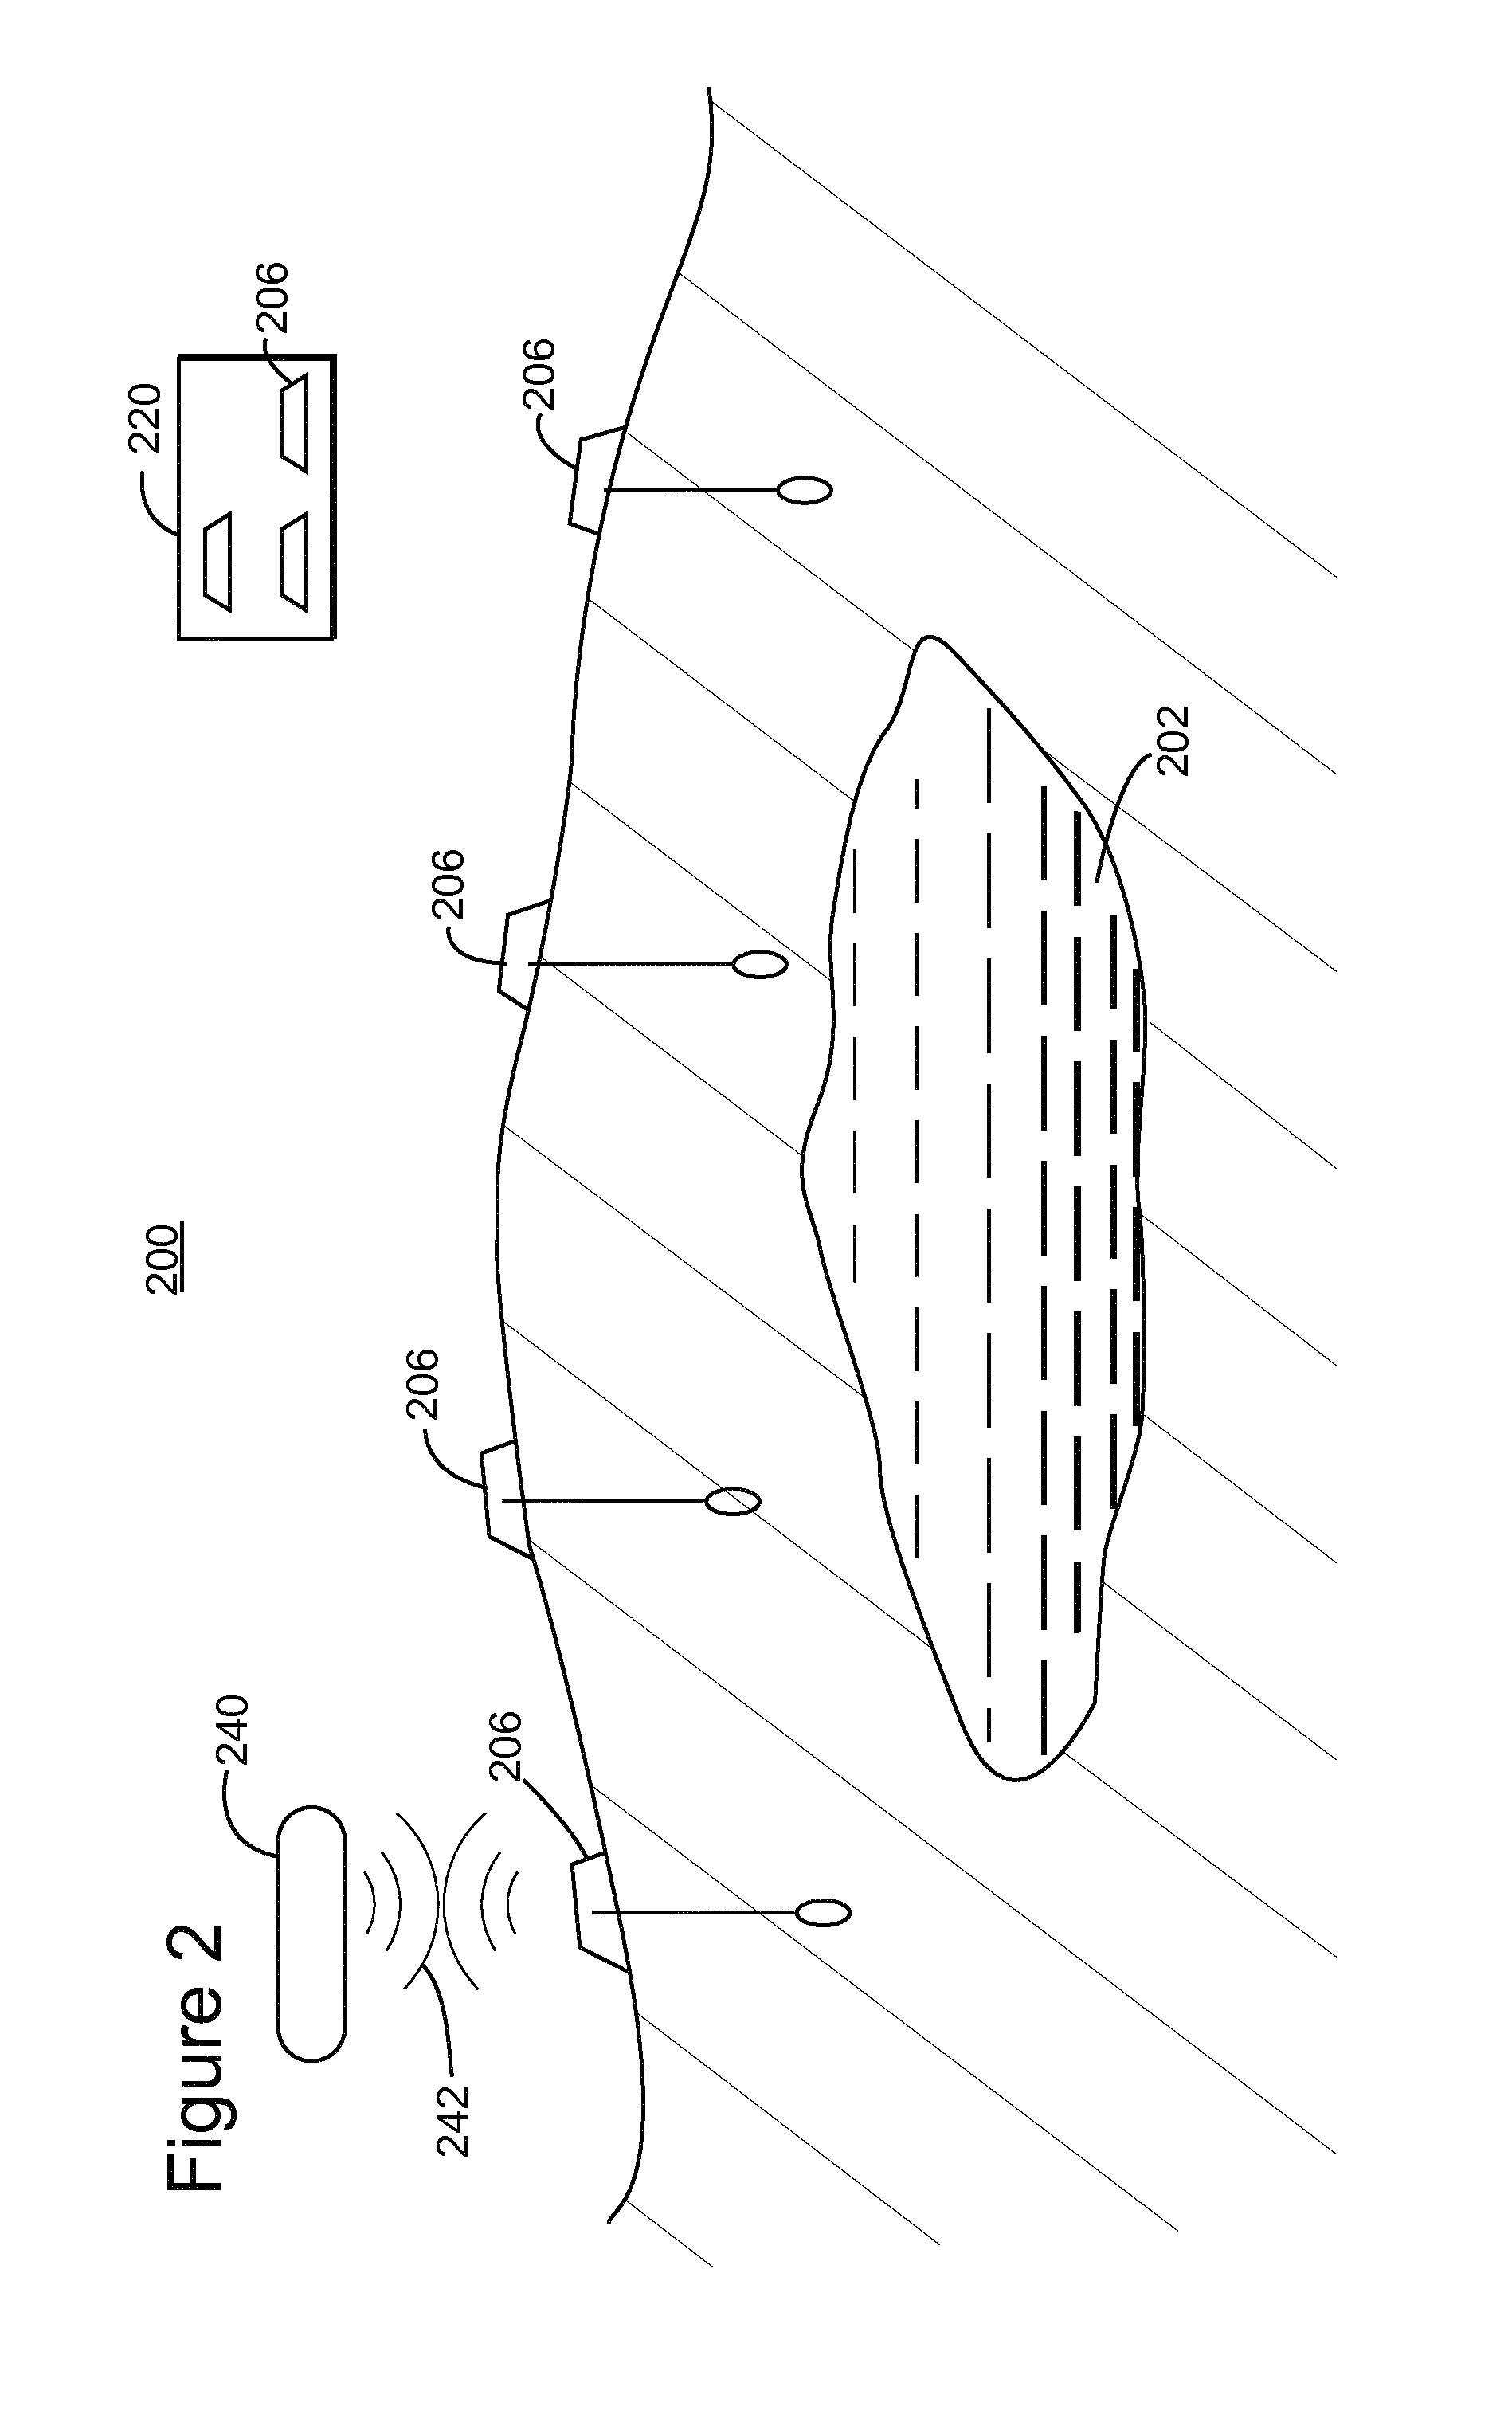 Offshore seismic monitoring system and method